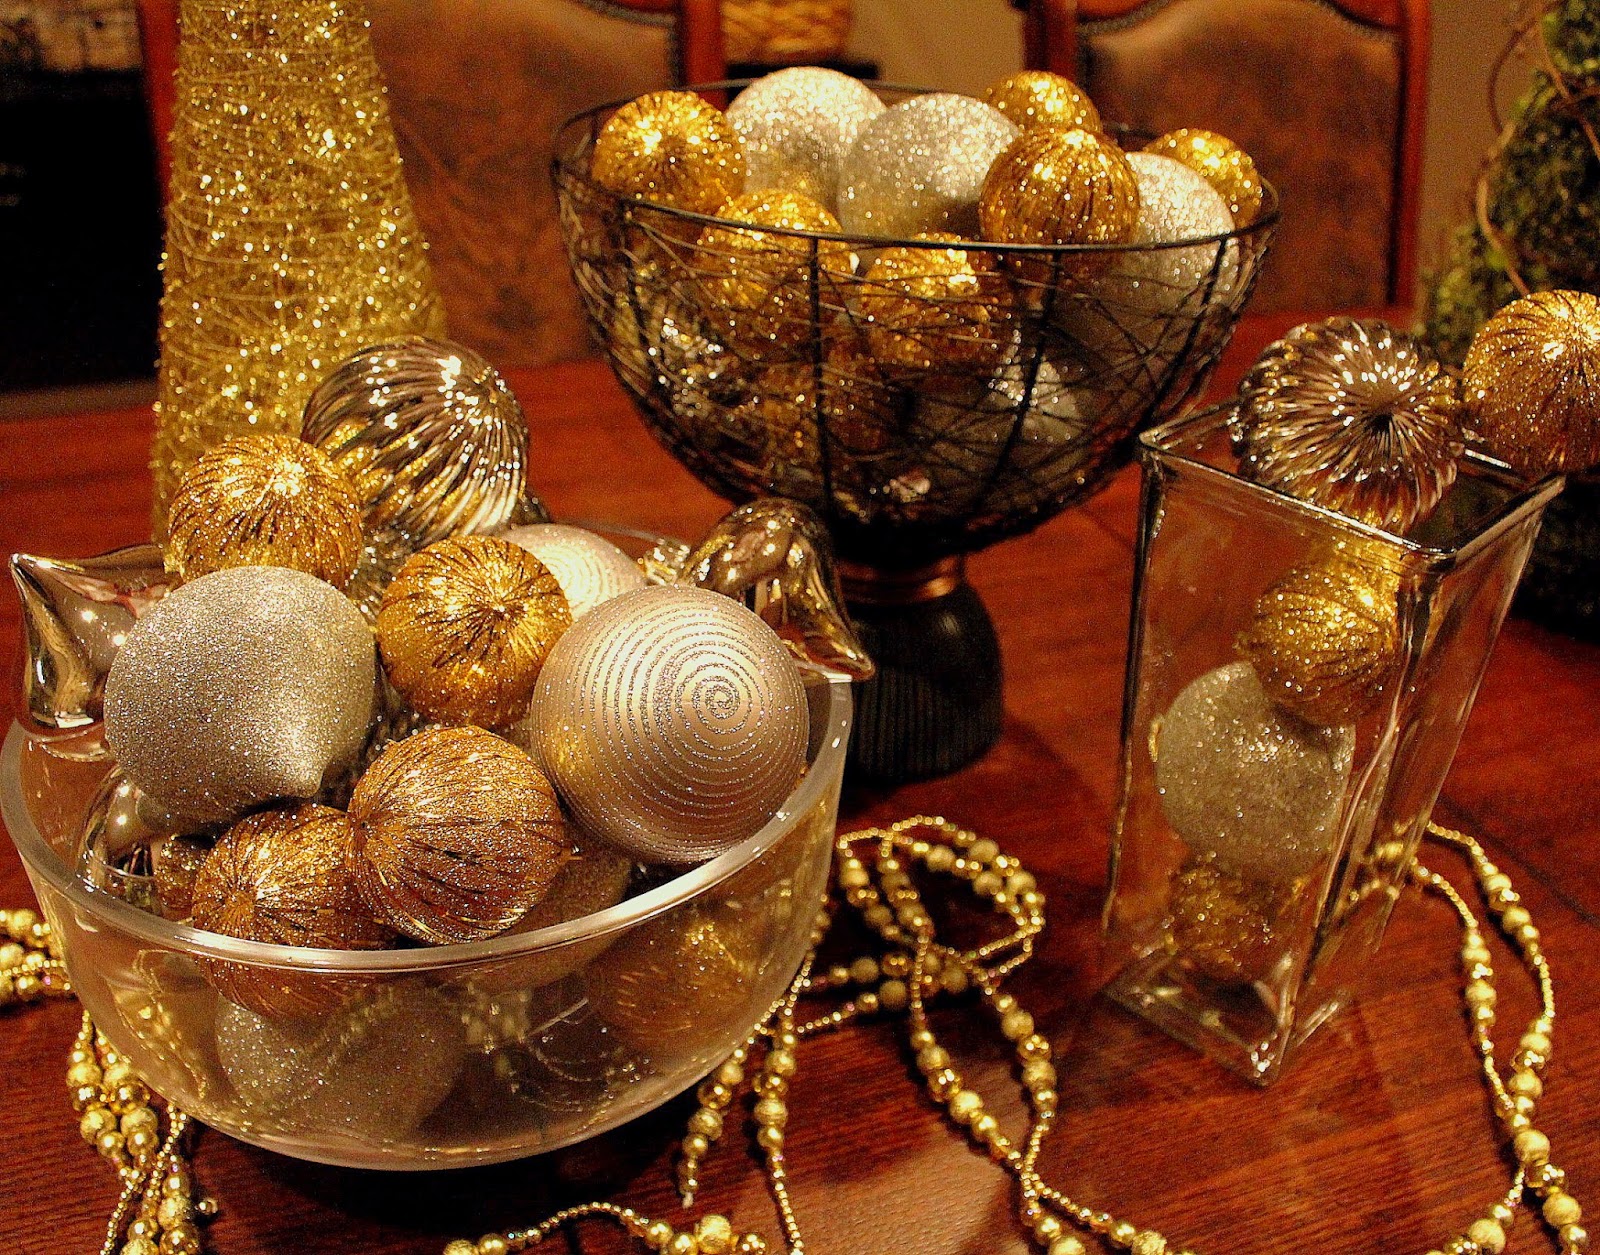 Turn Christmas Decorations into Festive New Year's Eve Decor! - The ...